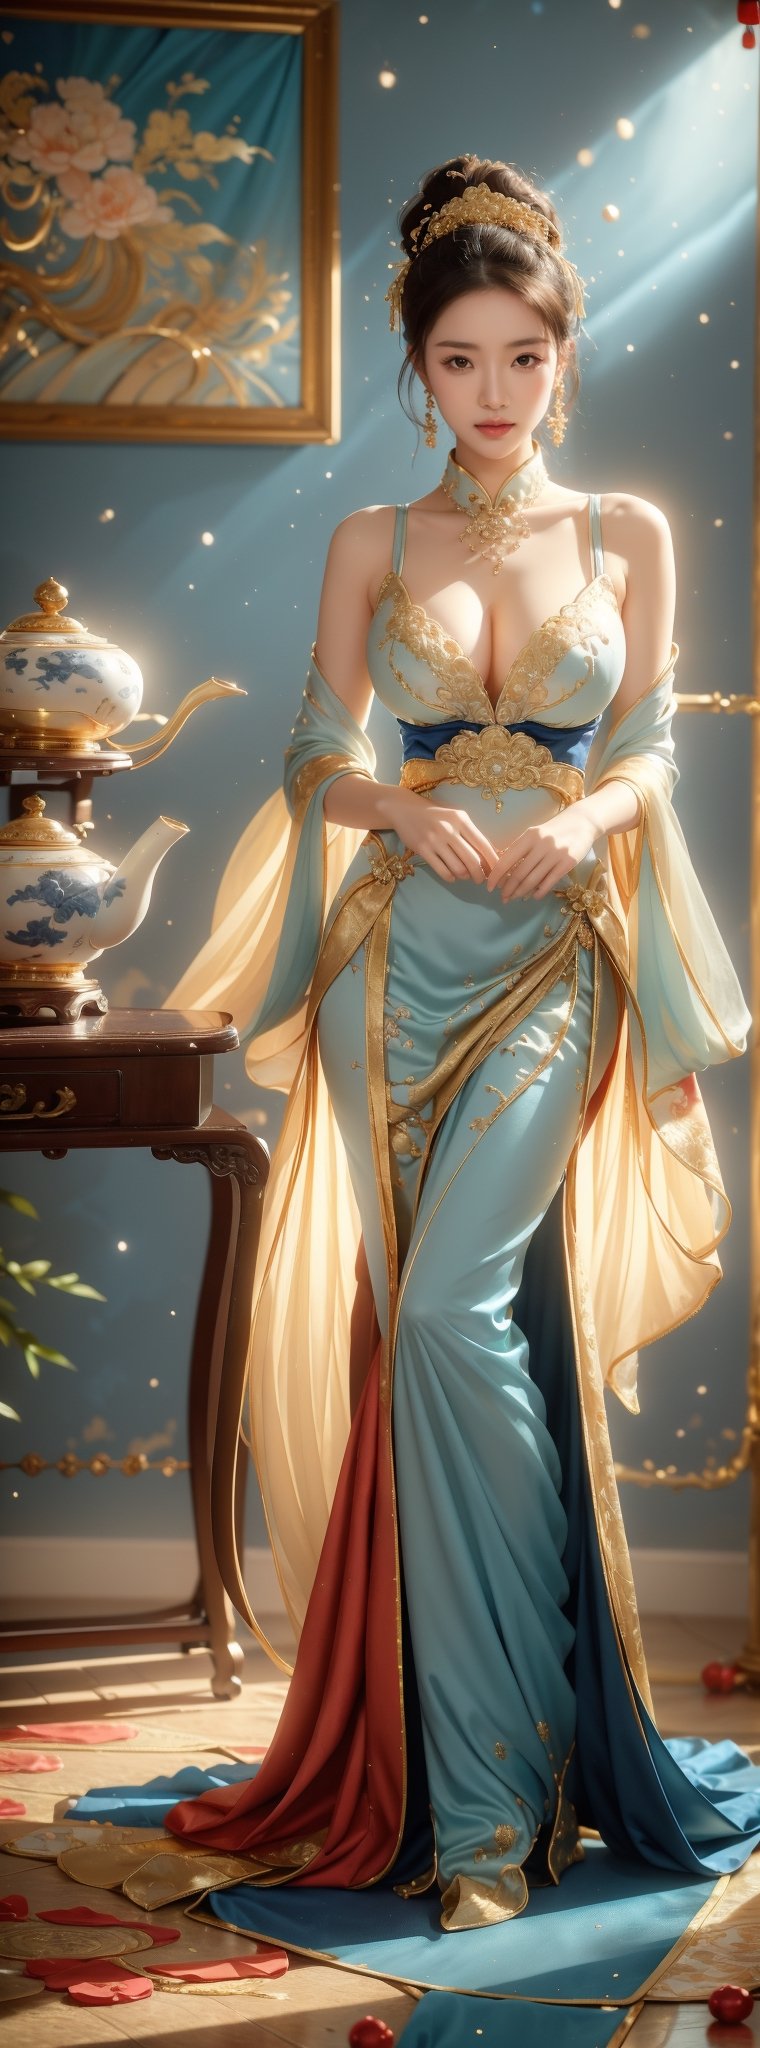 Ceramic material, beige gold tone, a 23-year-old Chinese beauty with an elegant and leisurely face, ((big natural breasts)),standing near a gorgeous single baroque sofa with a blue background and gold edges. Her outfit is predominantly white with navy blue trim and detailed with a detailed peony pattern. Her perfect long legs were exposed, and there was a blue and white porcelain teapot and teacup on the table next to the chair, indicating that this was a tea party. The floor beneath her feet was strewn with pearls and red beads. Directly behind the background is a gold-framed Chinese painting, and ornate interior decoration surrounds the central figure, adding to the luxurious feel of the scene.,pastelbg